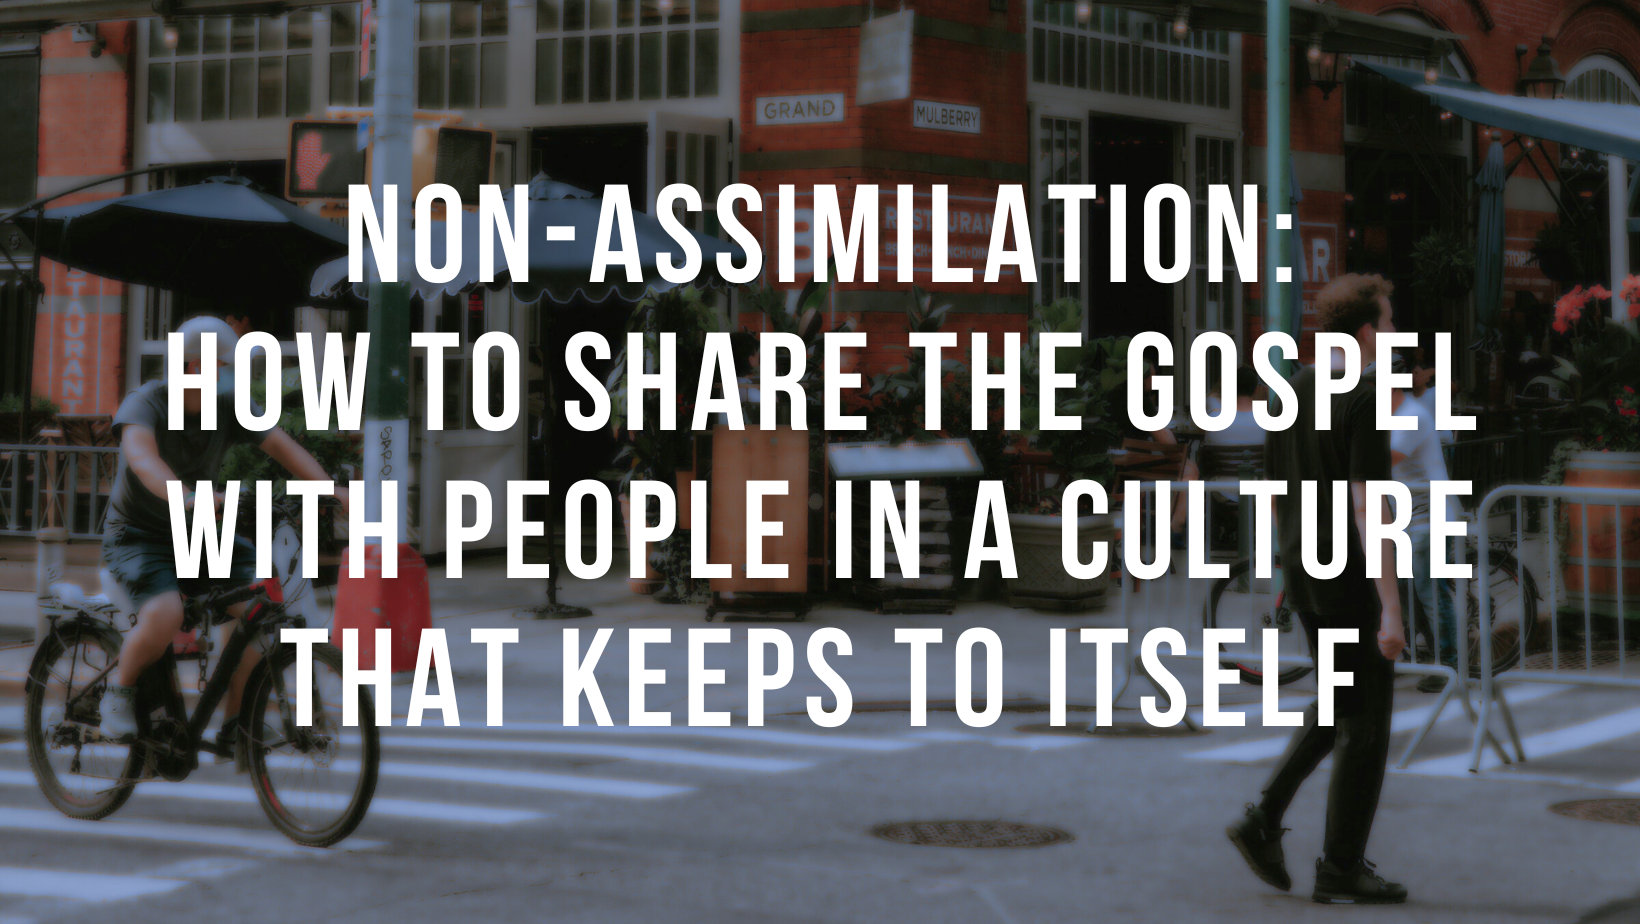 Non-assimilation: How to share the gospel with people in a culture that keeps to itself